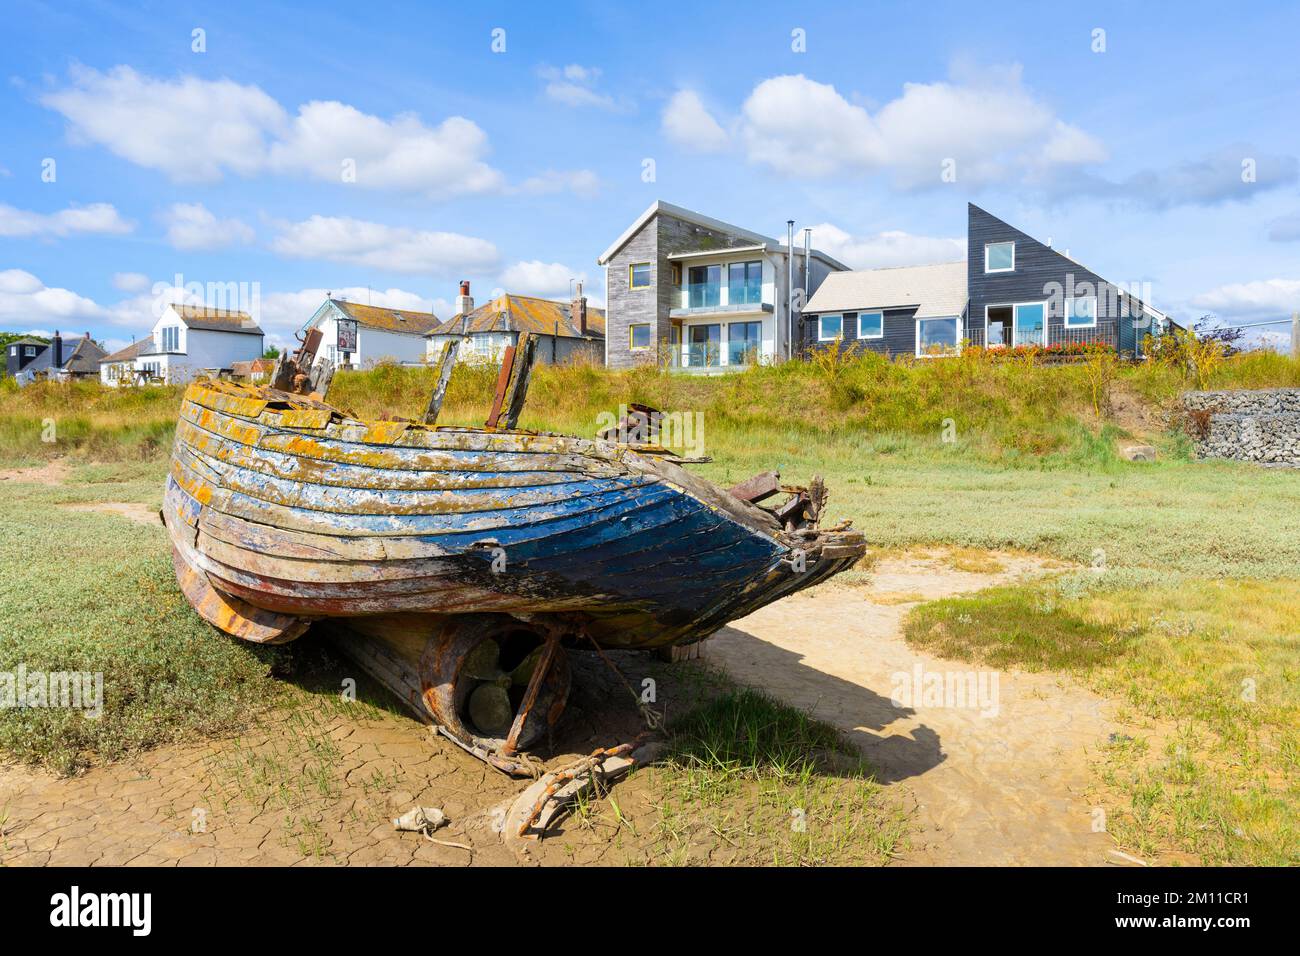 Rye harbour Old fishing boat moored on the Intertidal river banks of the River Rother at Rye Harbour village old boat Rye Sussex England UK GB Europe Stock Photo